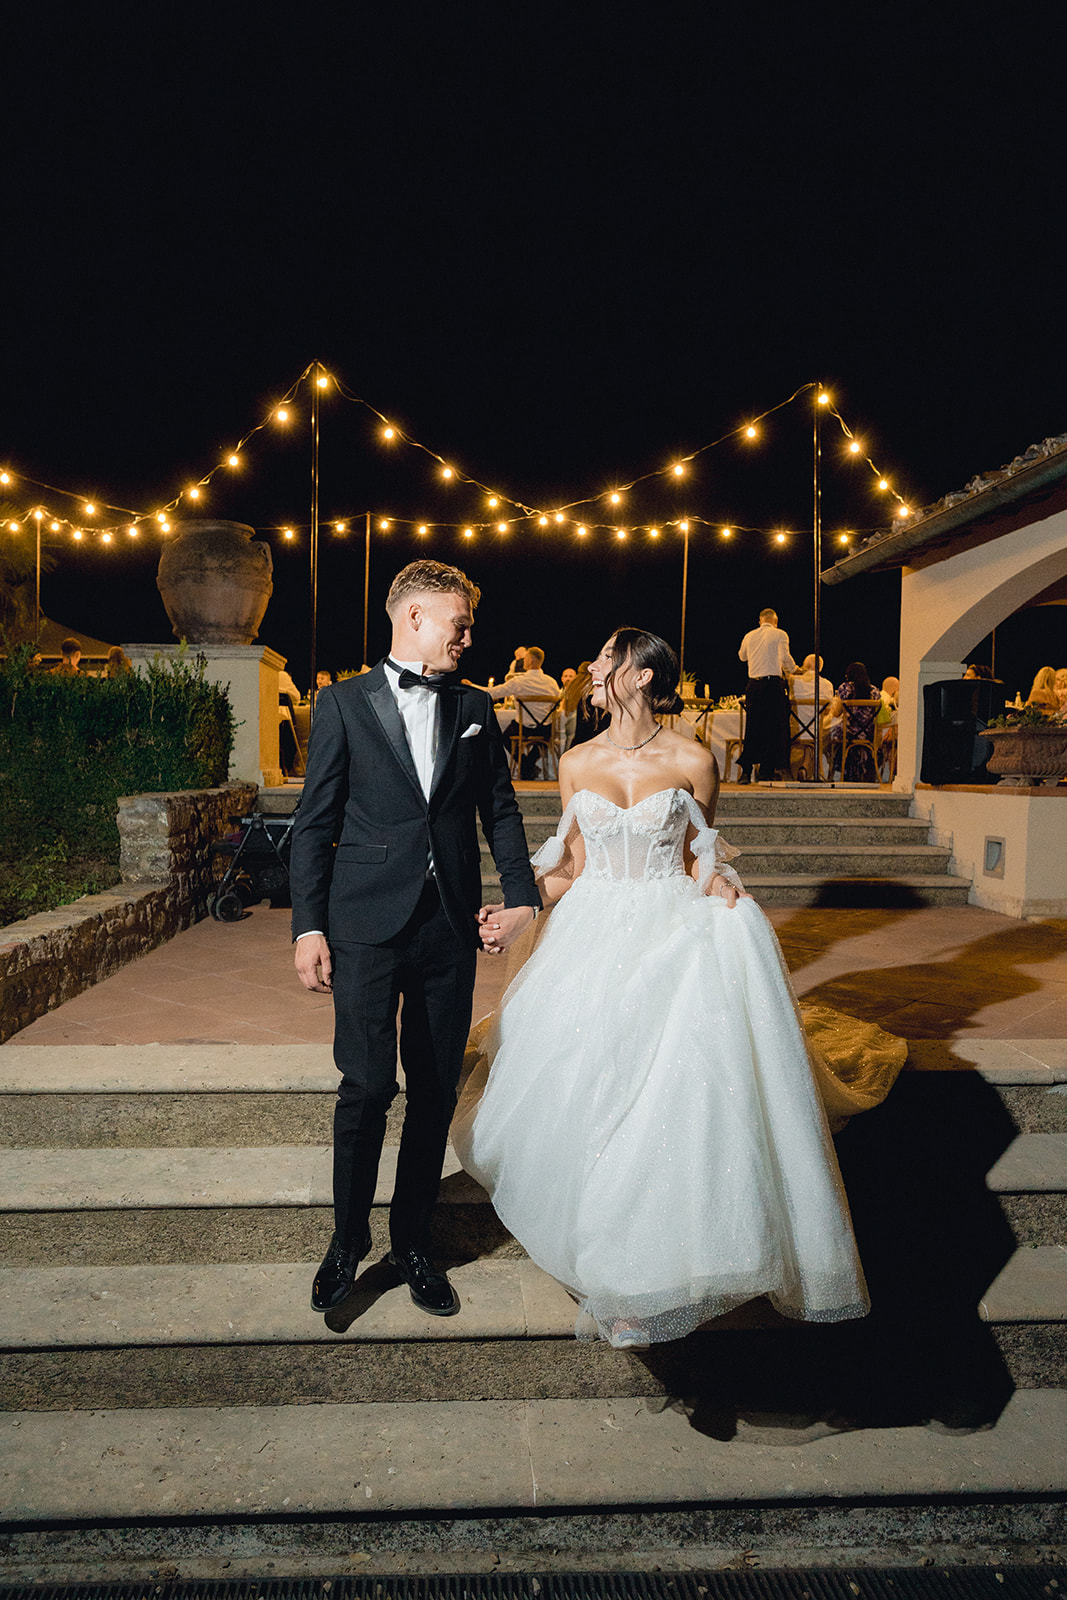 The newlyweds descend the steps of the terrace at Villa La Selva, adorned with Italian lights